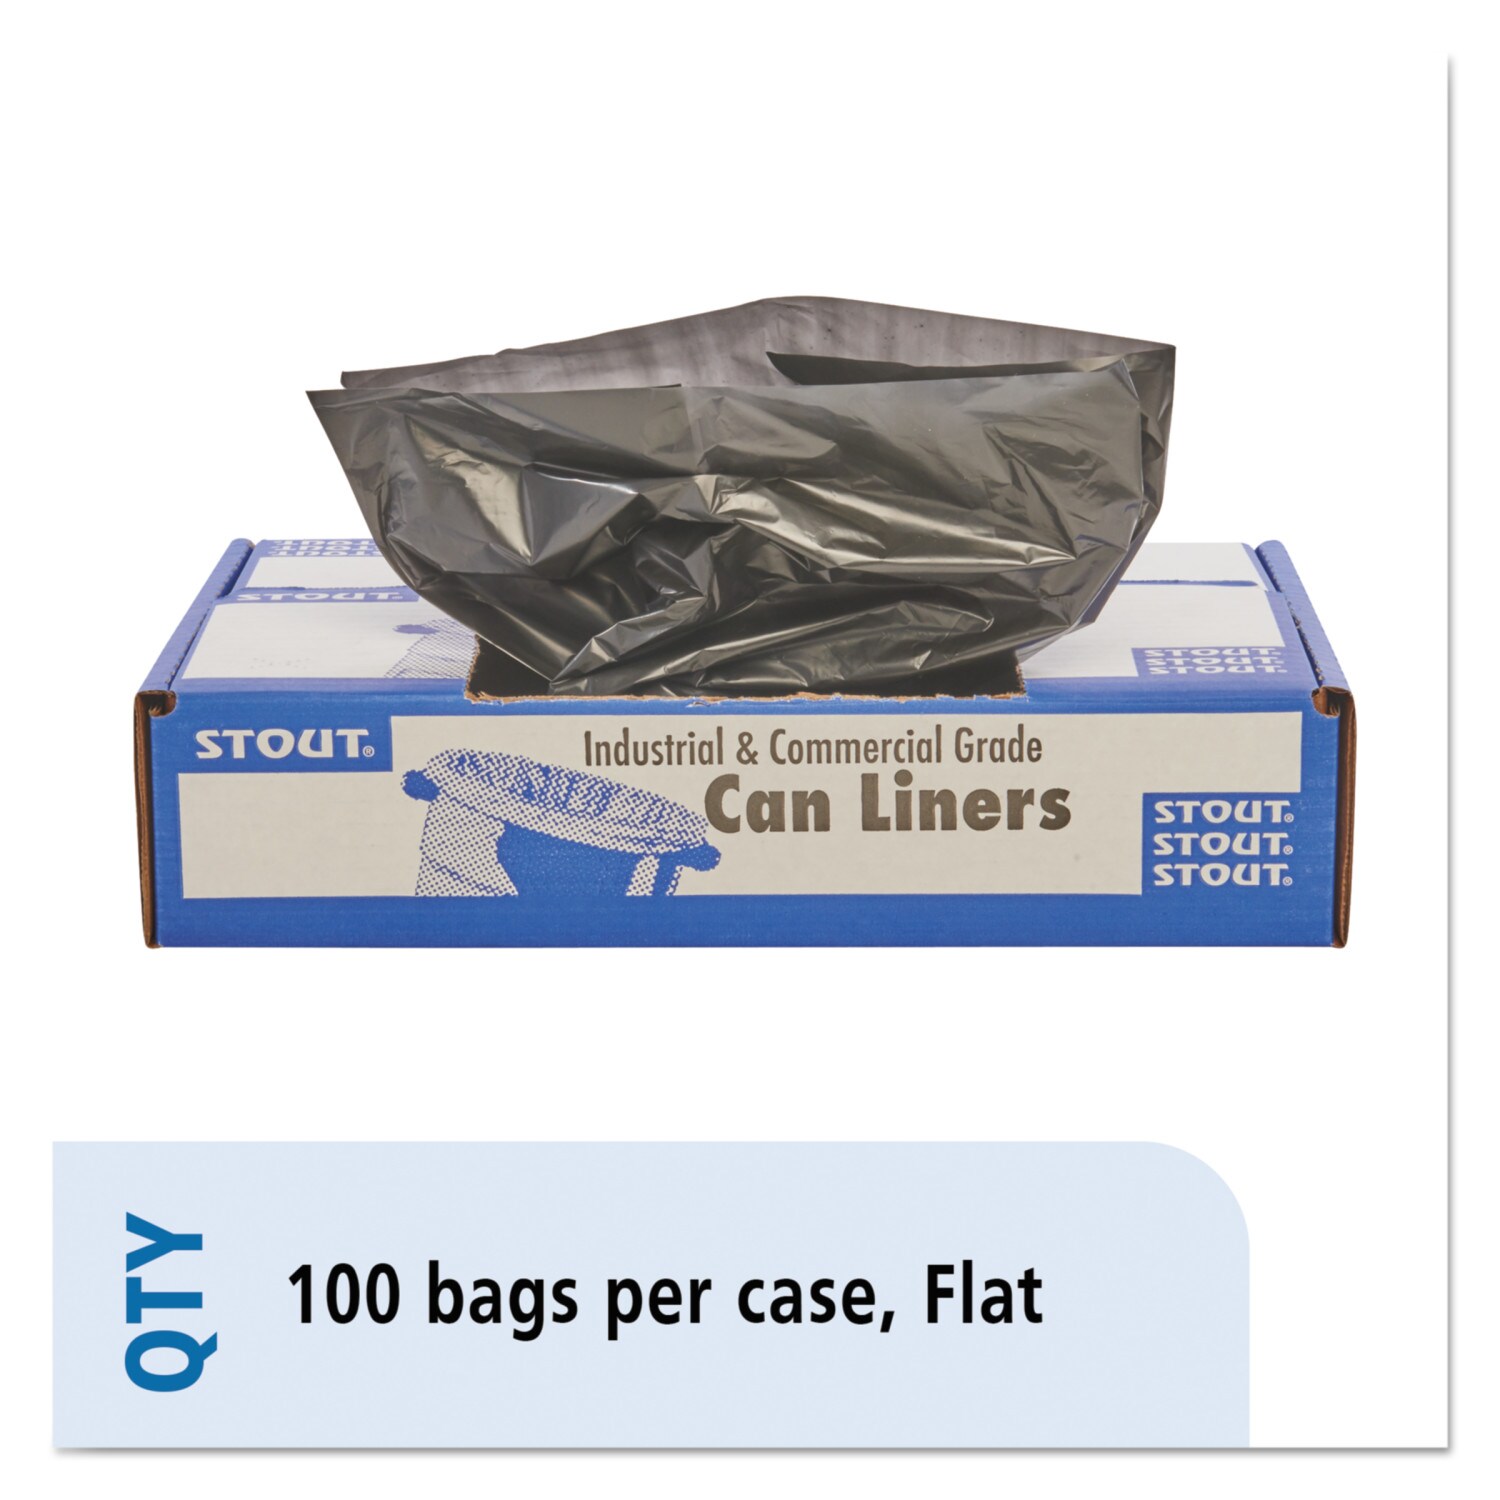 BioBag 55 Gallon Compostable Liners / 80-Ct. Case